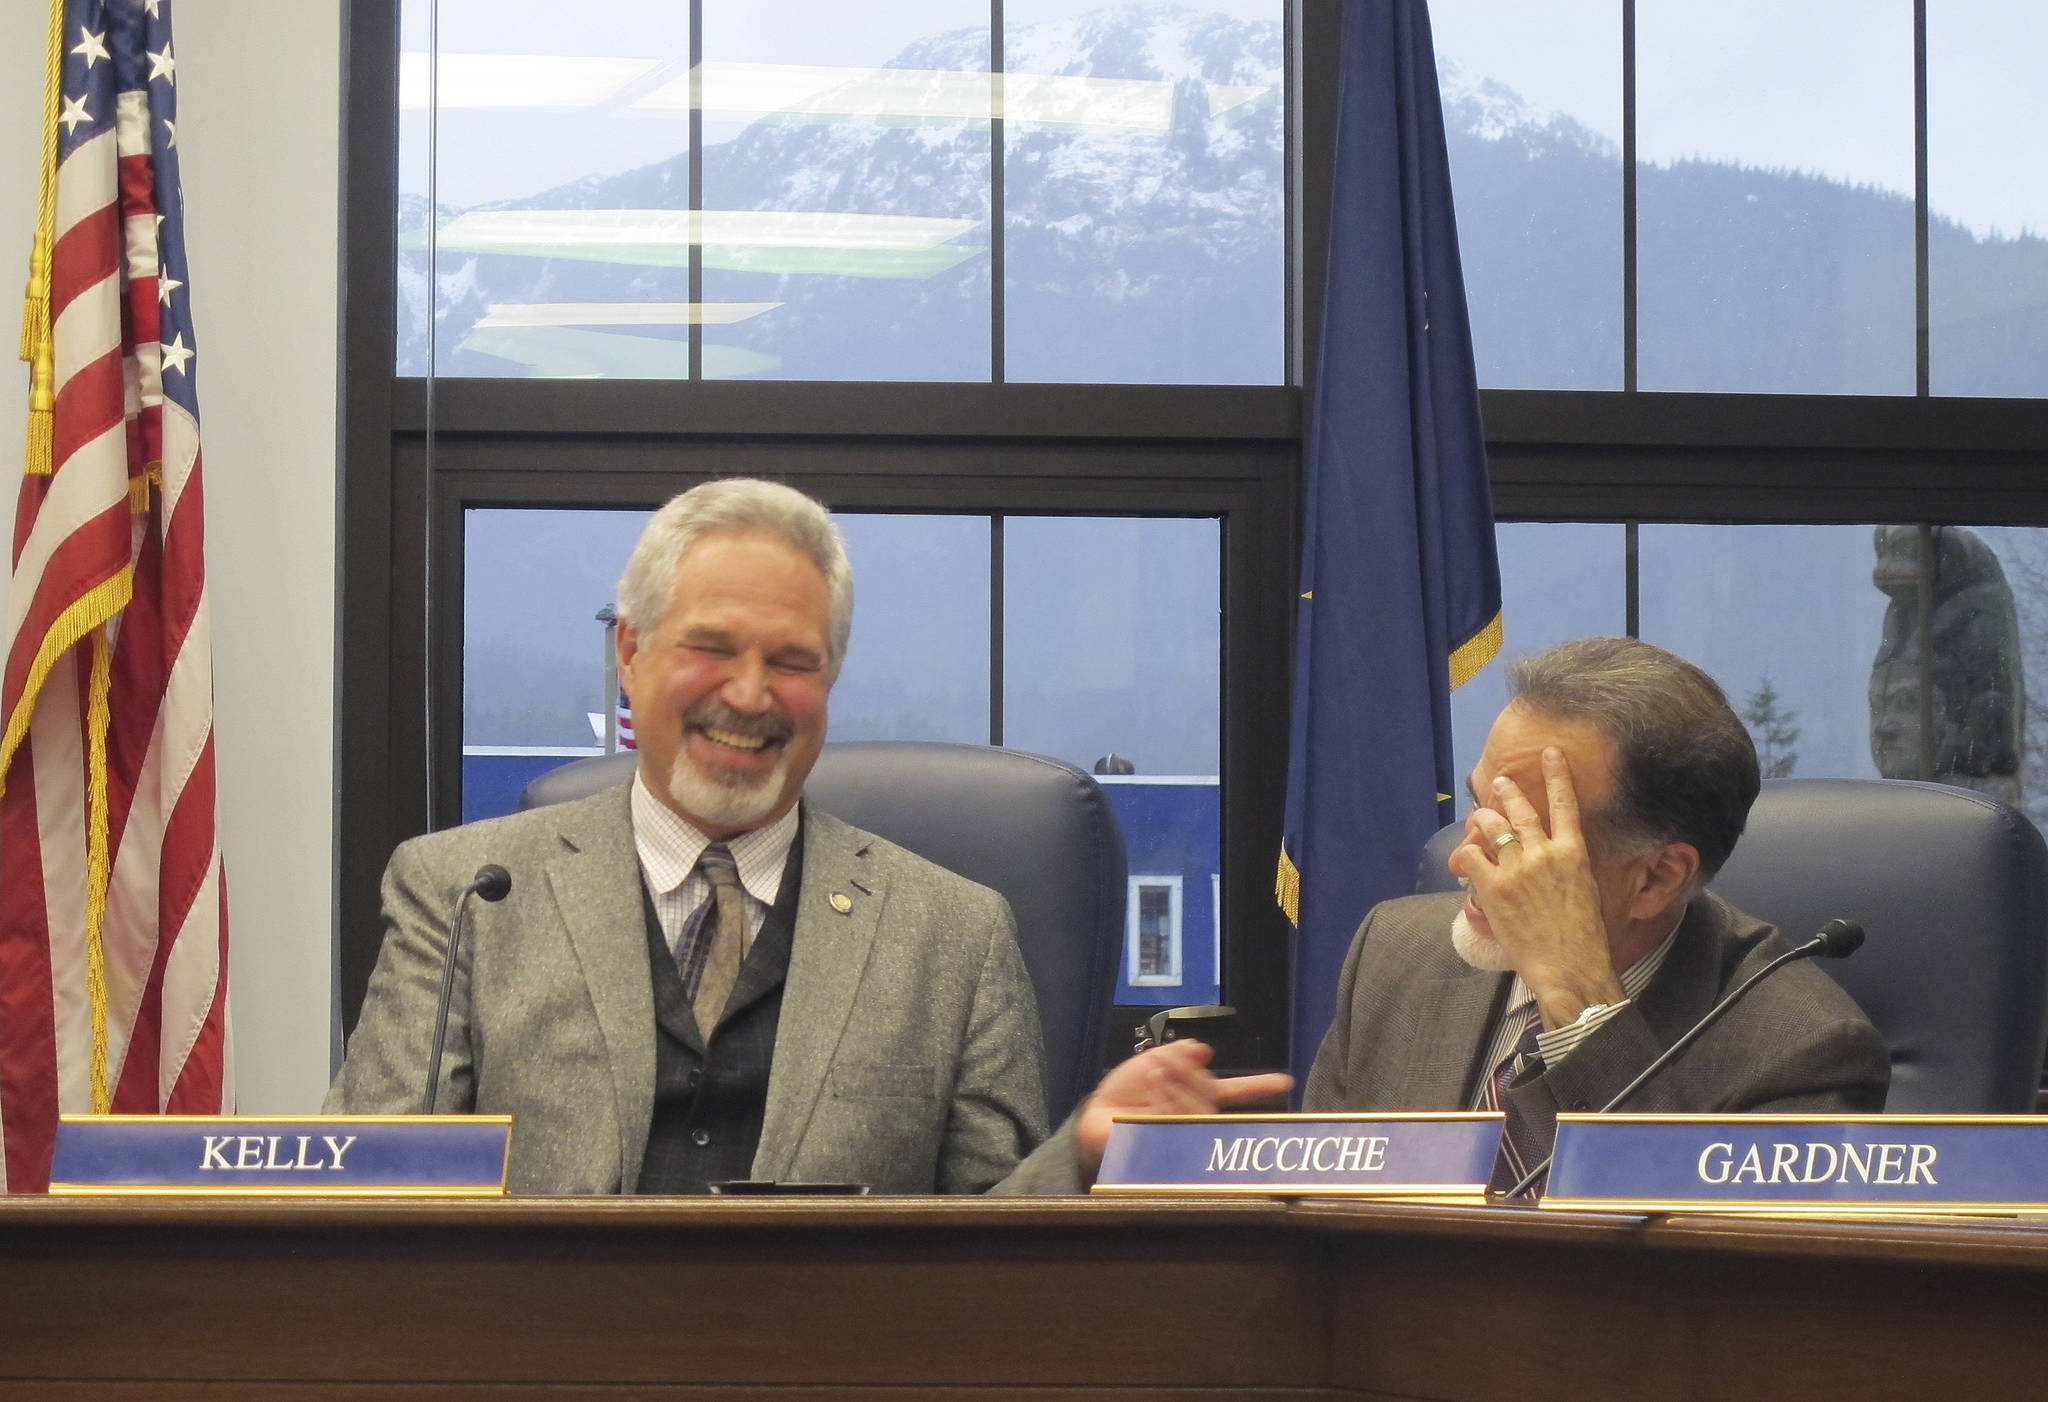 Alaska state Senate President Pete Kelly, left, laughs with Sen. Peter Micciche following a Senate committee meeting on Monday in Juneau. Legislators on Monday convened for their fourth special session of the year, this one called by the governor to address taxes and crime. (AP Photo/Becky Bohrer)